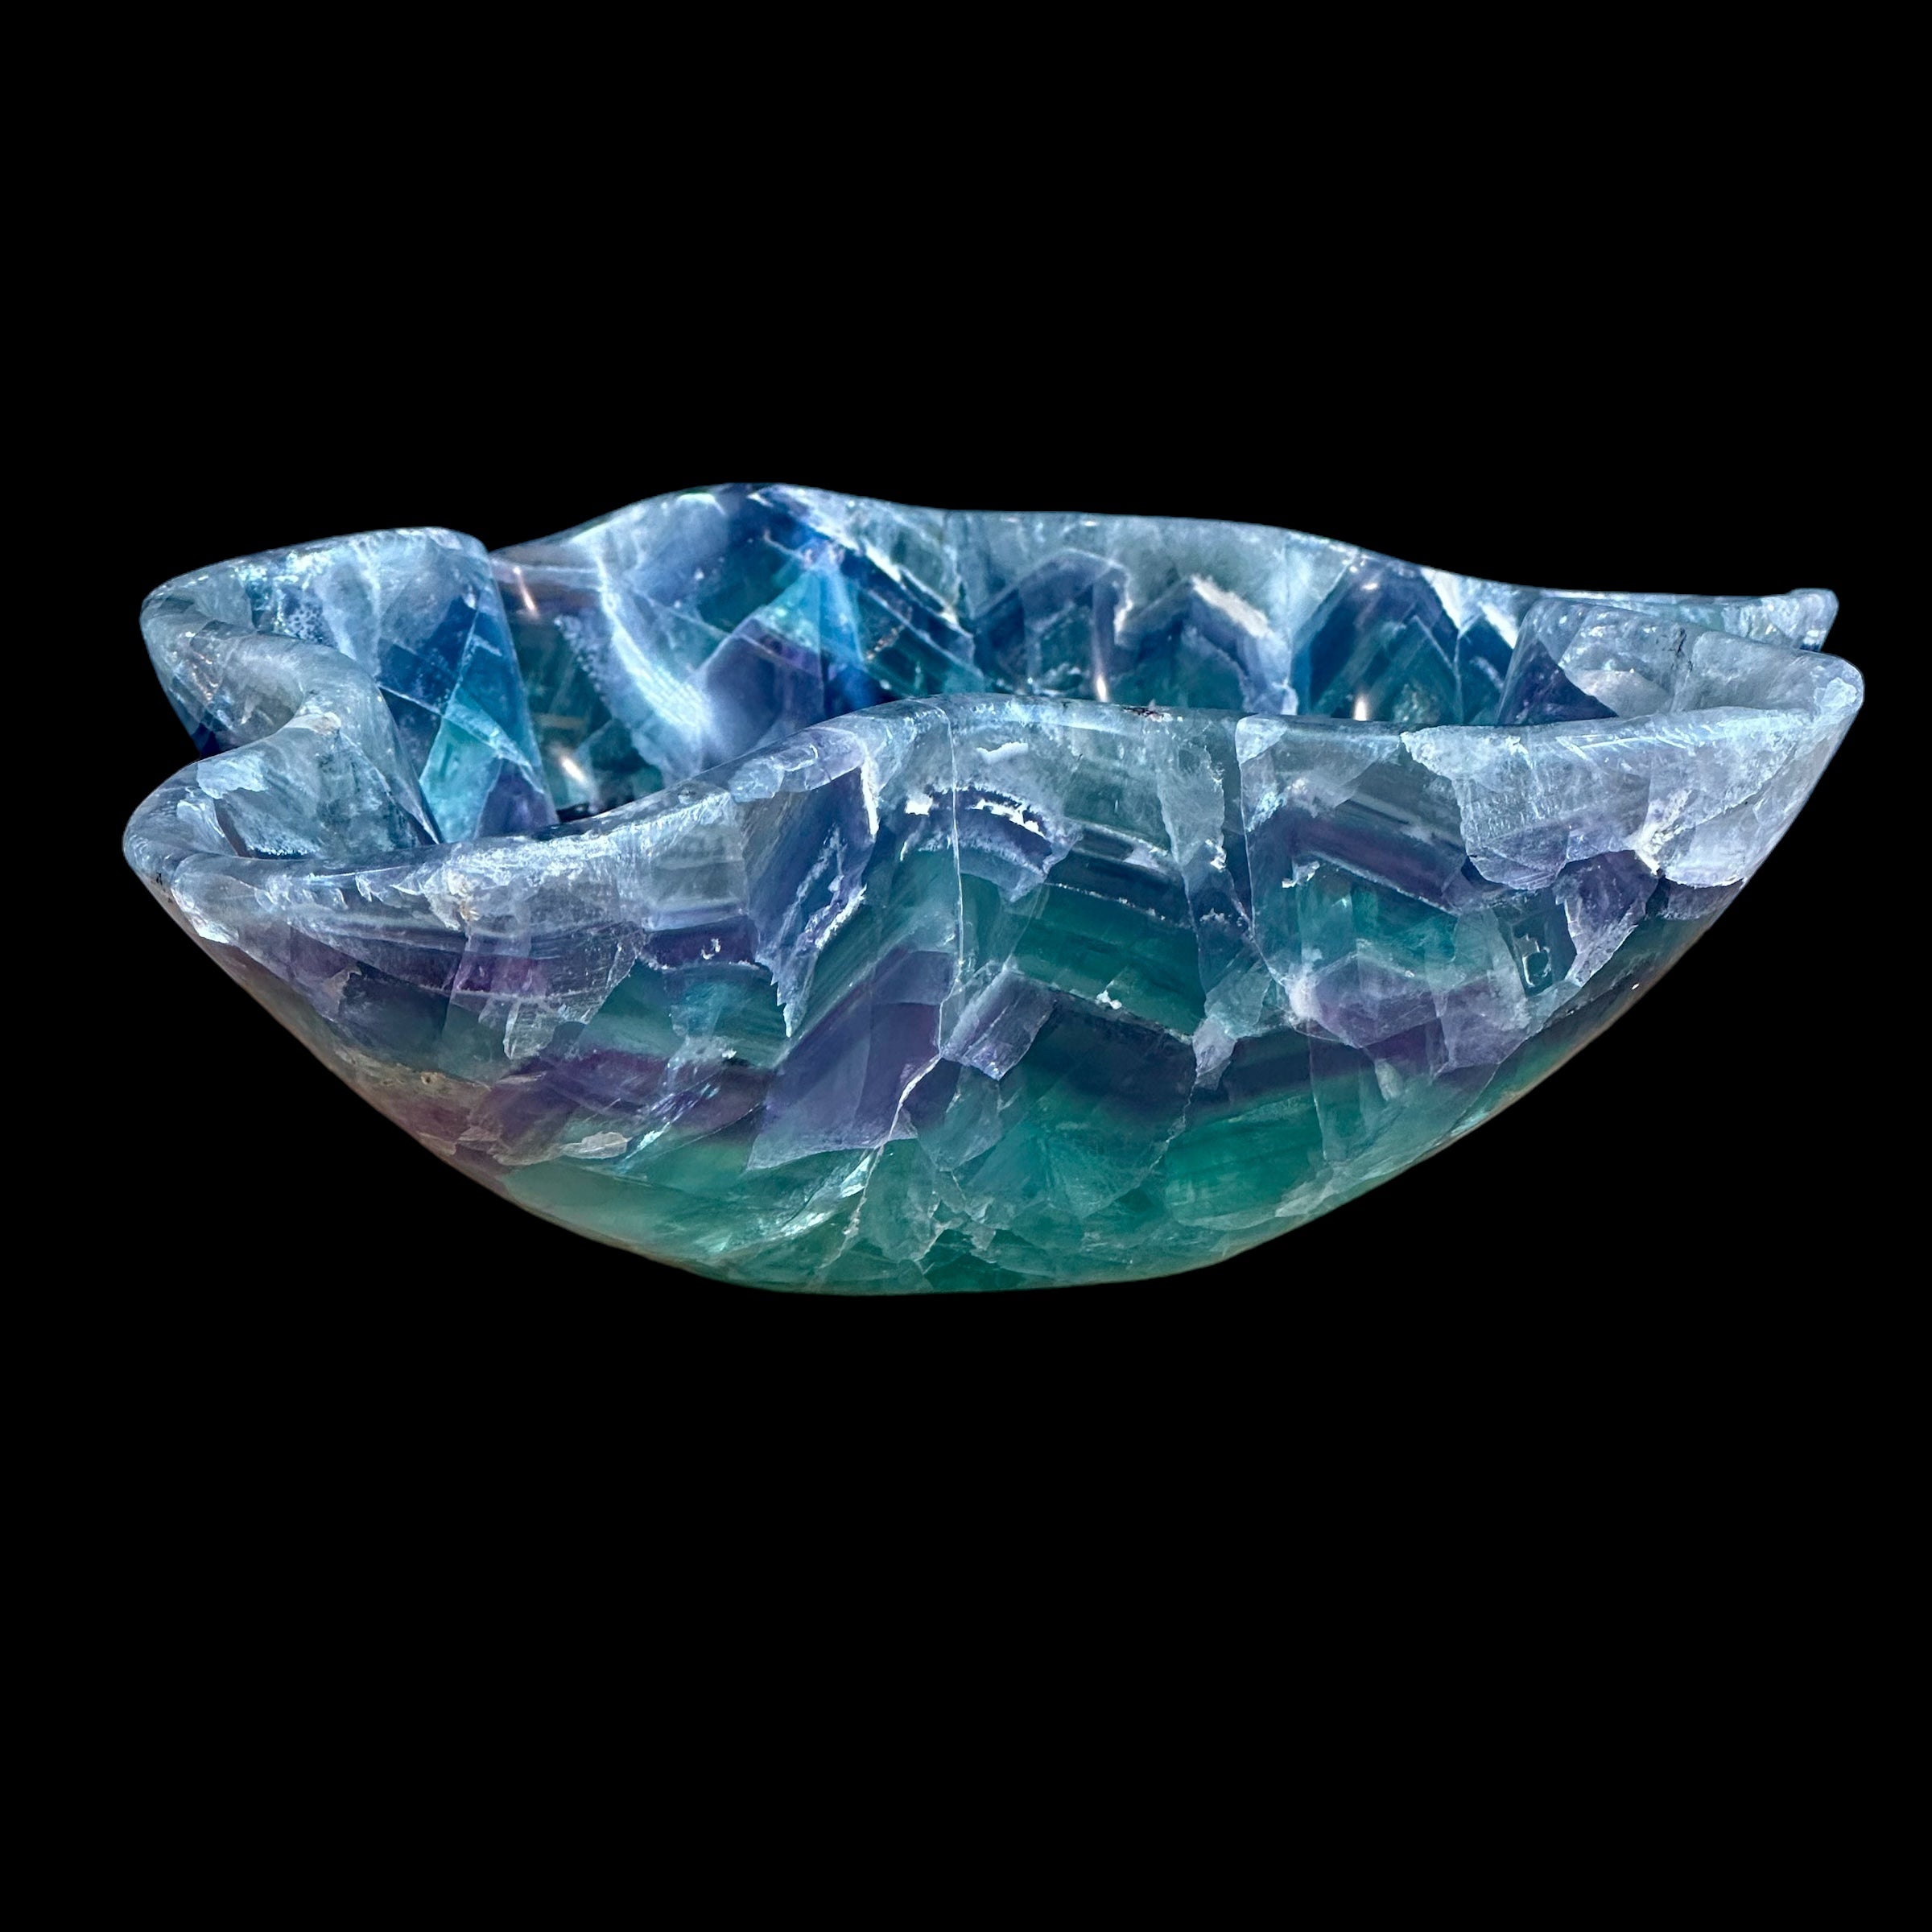 Handcrafted Fluorite Bowl - Grade A Fluorite - Fluorescent with visible Denderites